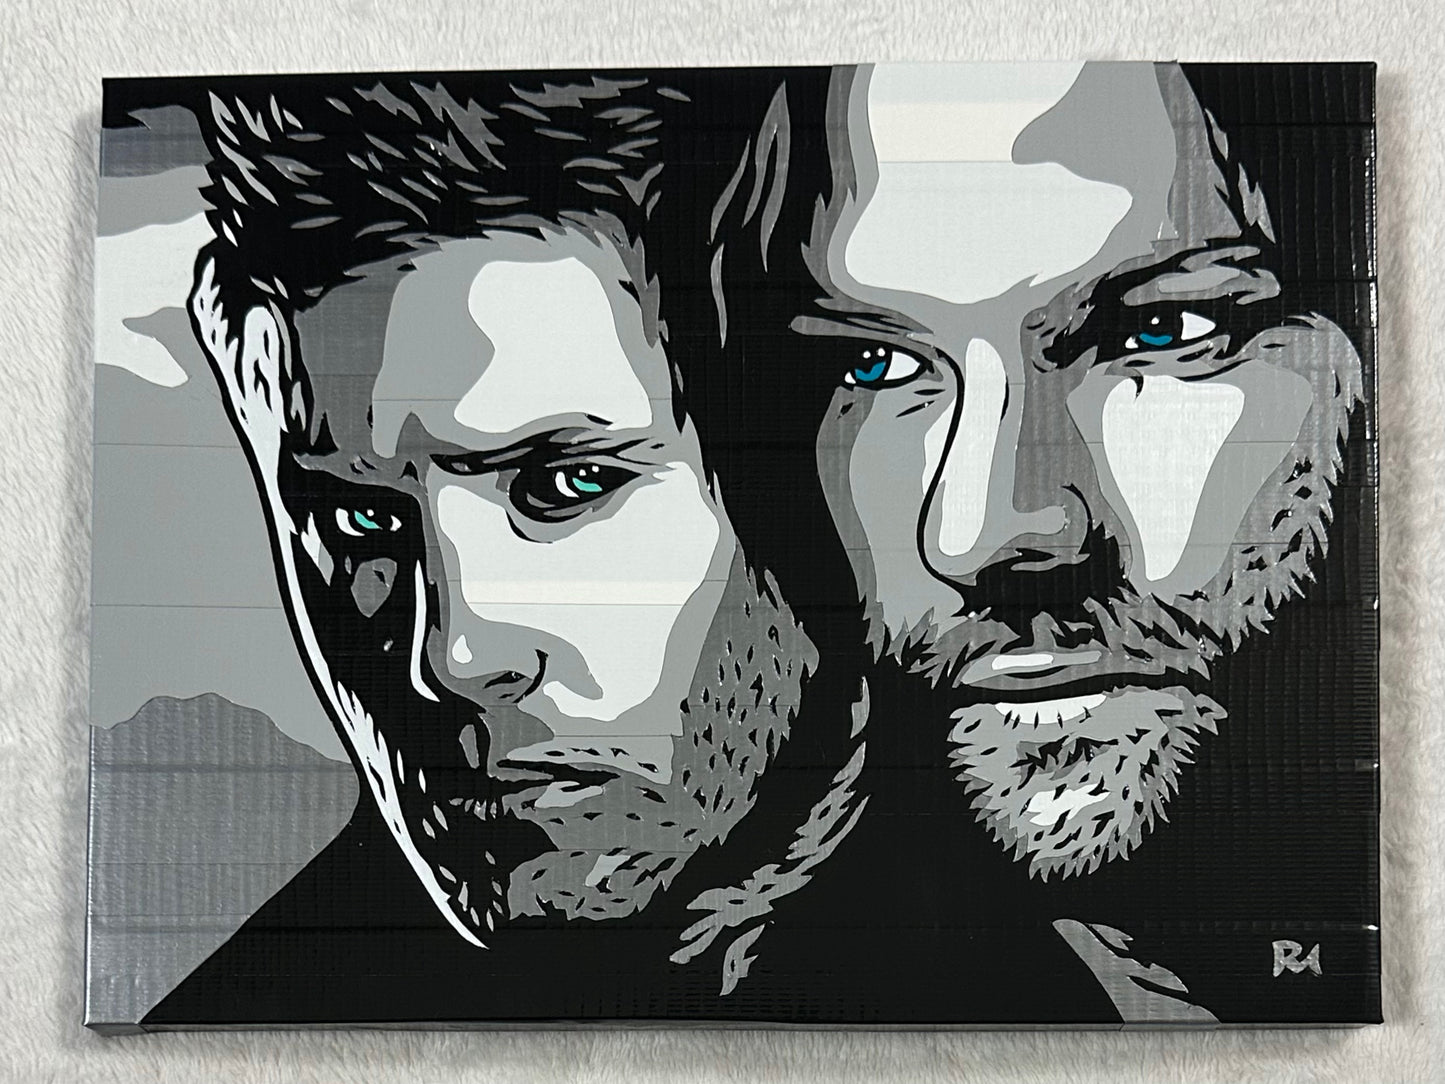 A black and white image of Sam and Dean Winchester, created with different shades of duct tape, on a white background.